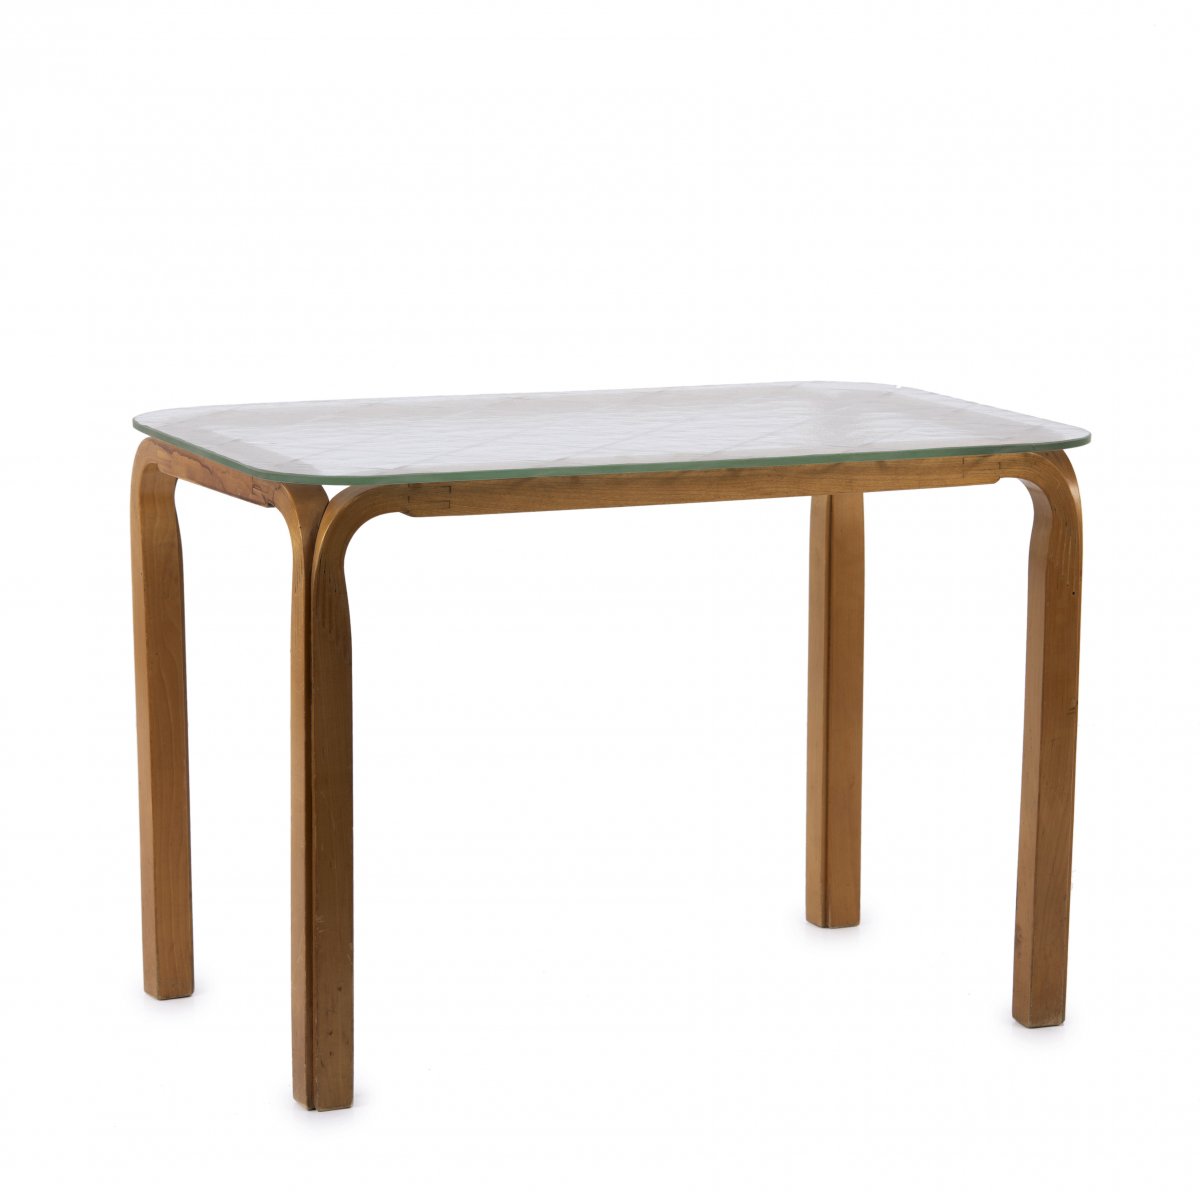 Alvar Aalto, Side table 'Y85', around 1947Side table 'Y85', around 1947H. 43.5 x 64 x 41 cm. Made by